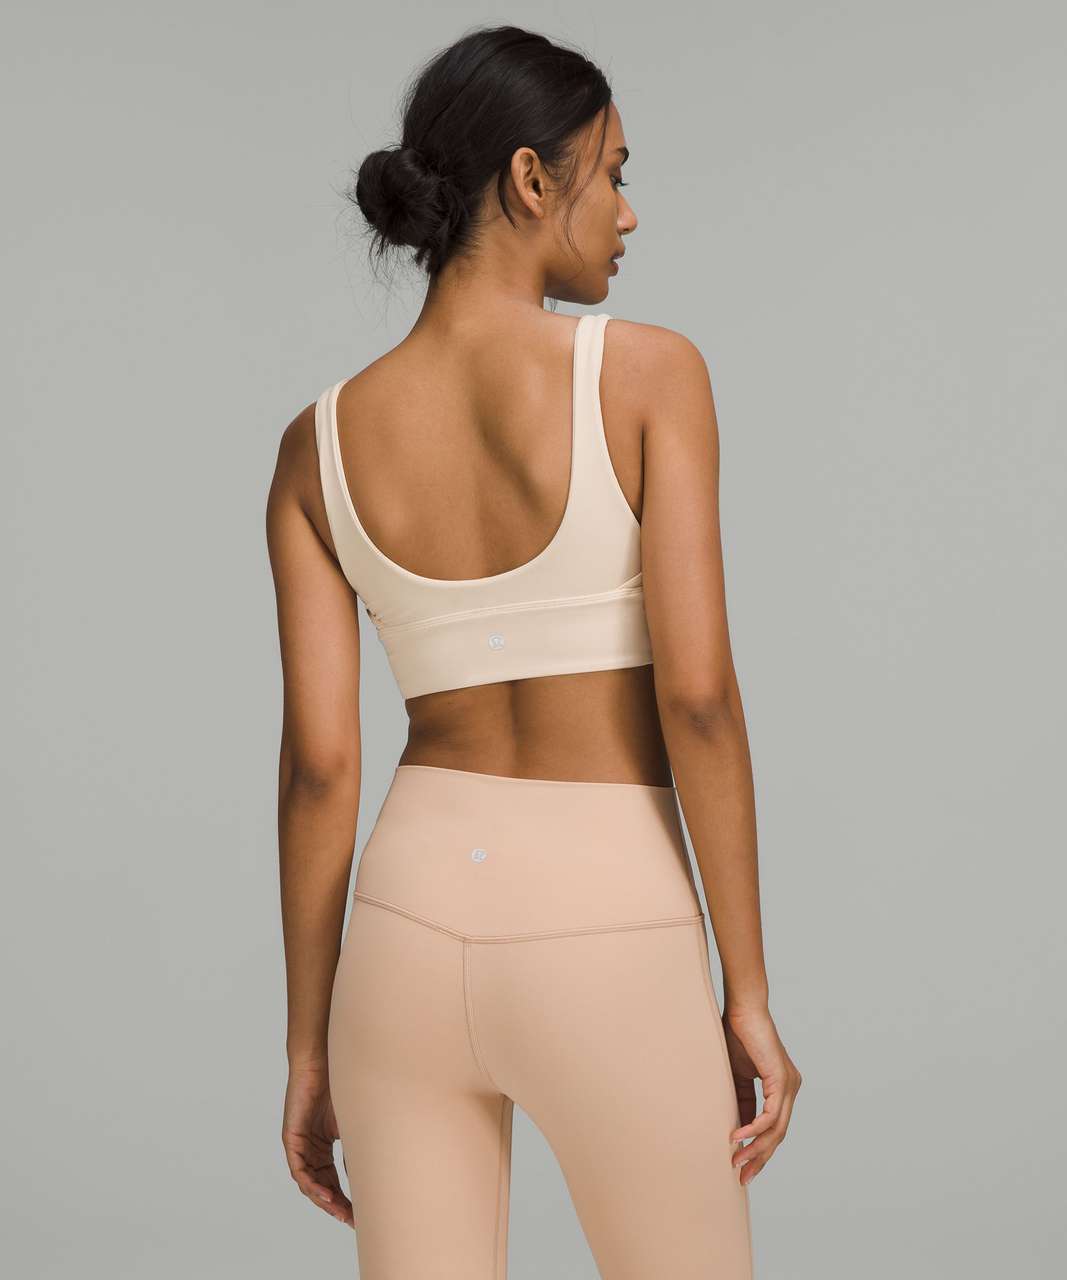 lululemon Align™ Reversible Bra *Light Support, A/B Cup, Mulled Wine/Canyon  Orange